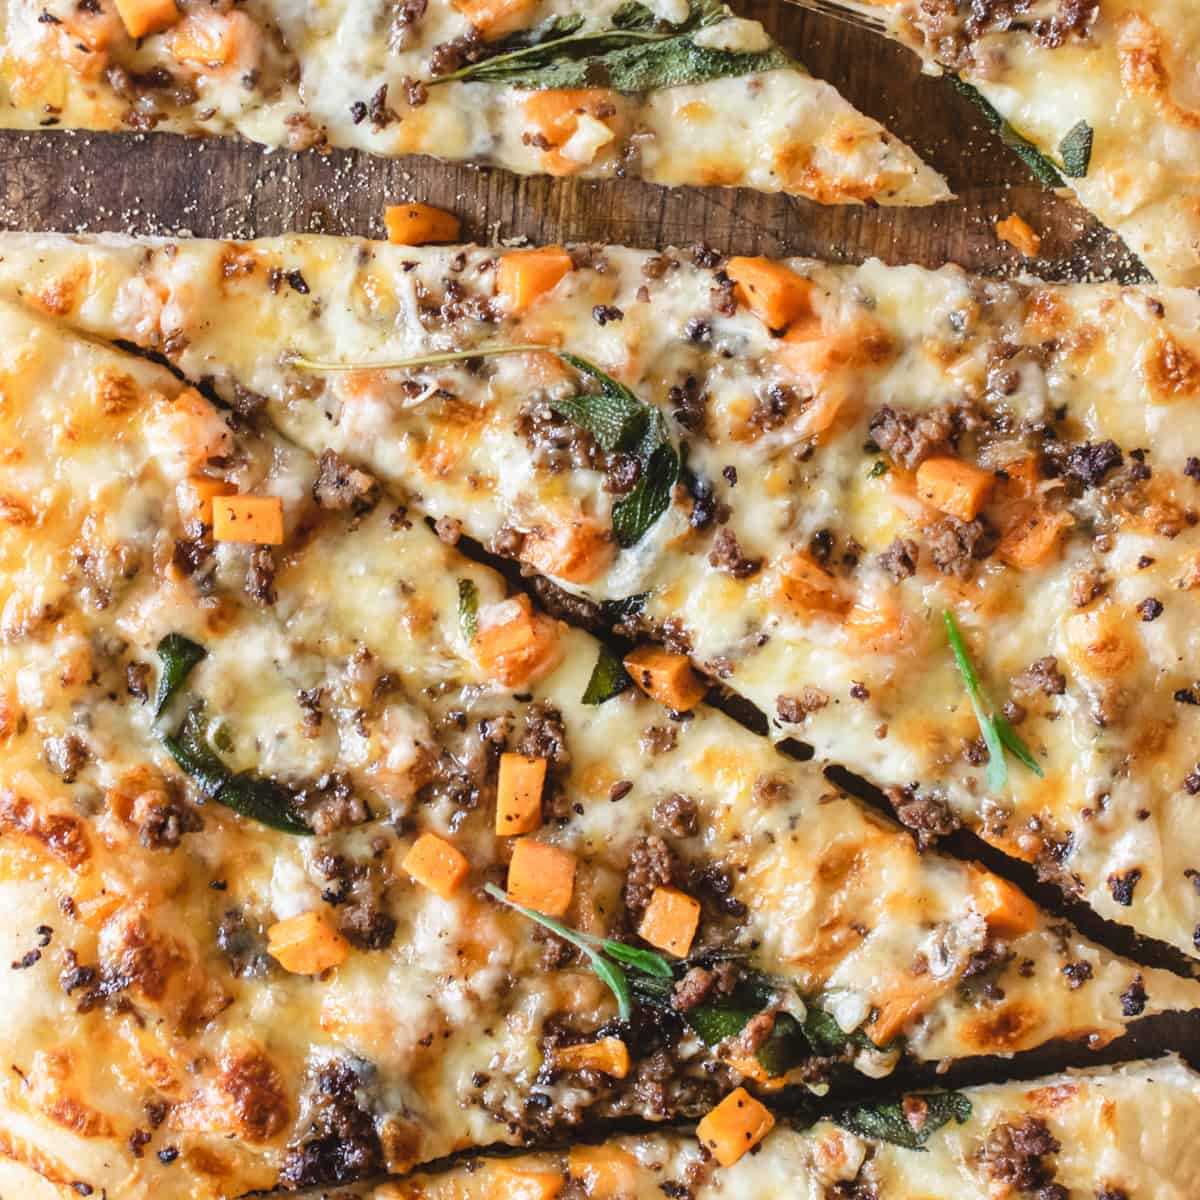 Pizza with cheese, sausage, sweet potato and sage on top.